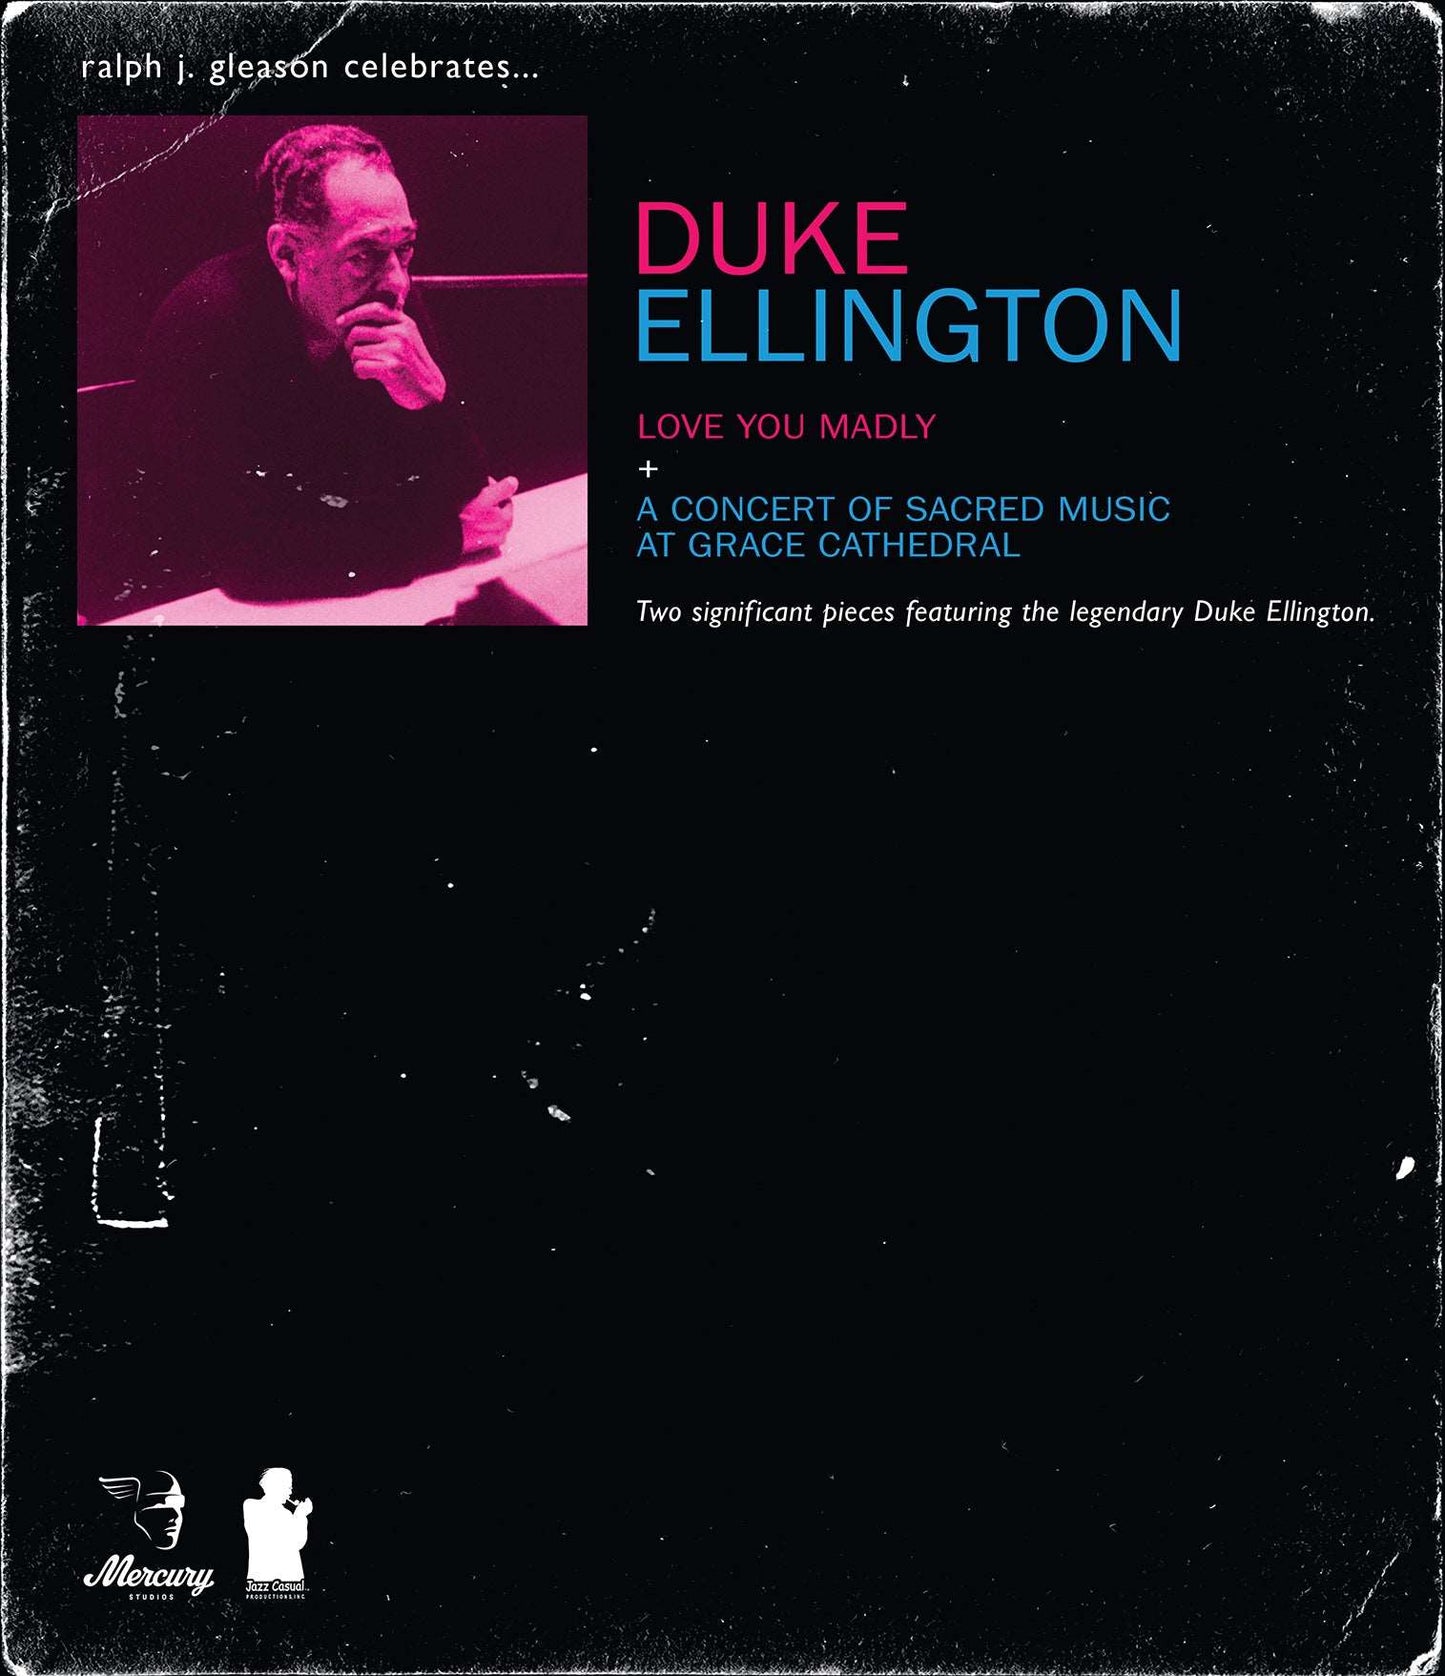 Duke Ellington - Love You Madly + A Concert of Sacred Music At Grace Cathedral - The Vault Collective ltd